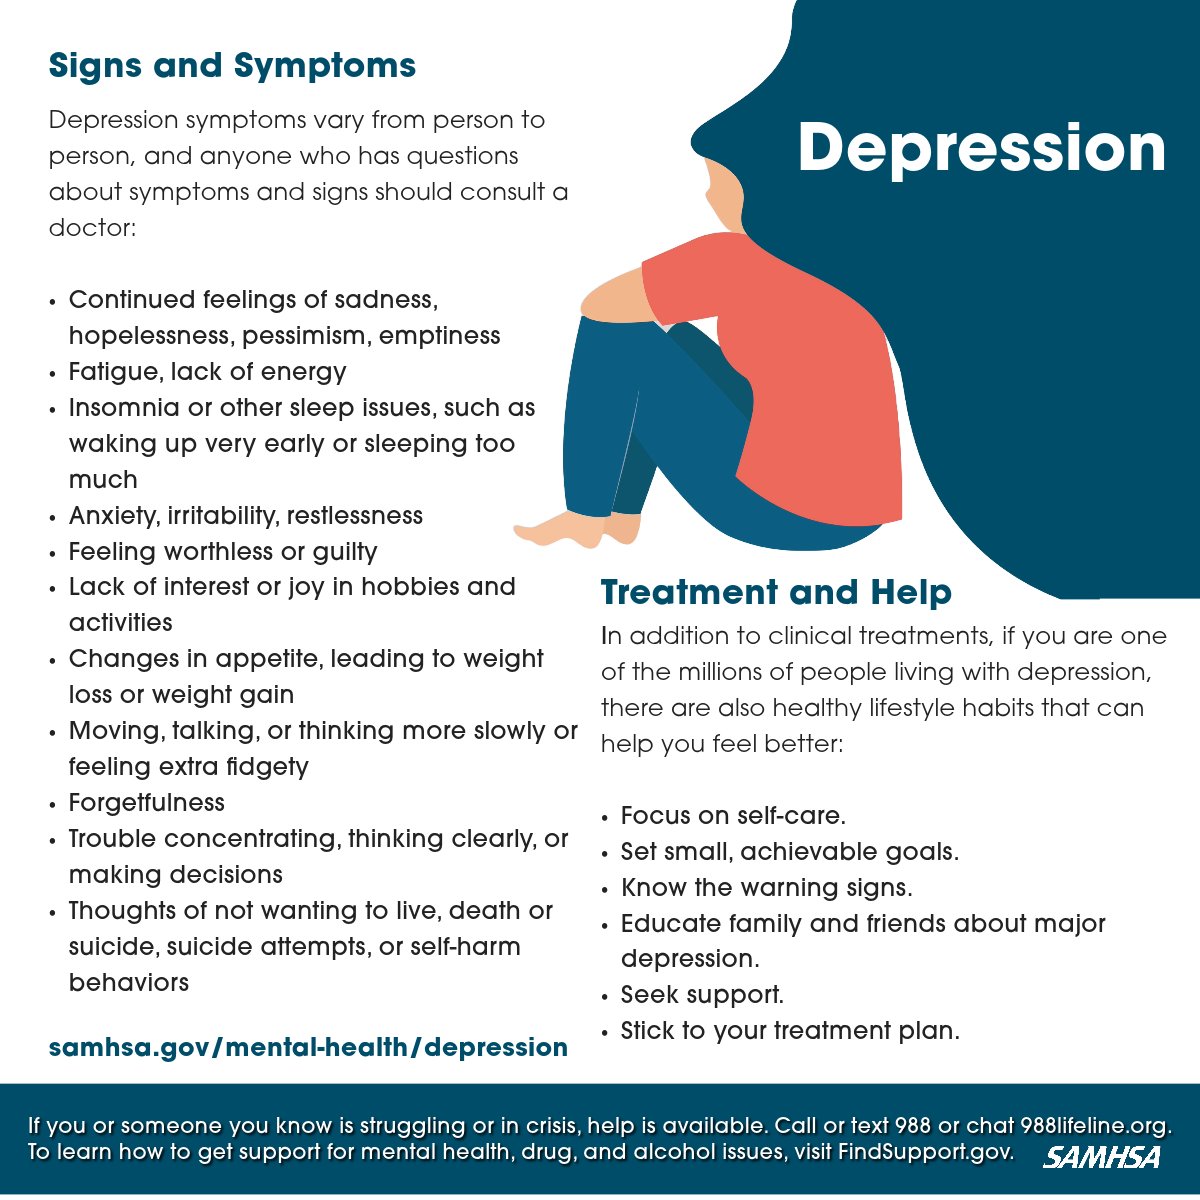 Depression is a disorder of the brain that's more than just 'feeling blue' for a few days. Help raise awareness about depression, learn the different types of depression, signs and symptoms, treatment options, and how to find help. samhsa.gov/mental-health/… #MHAM2024